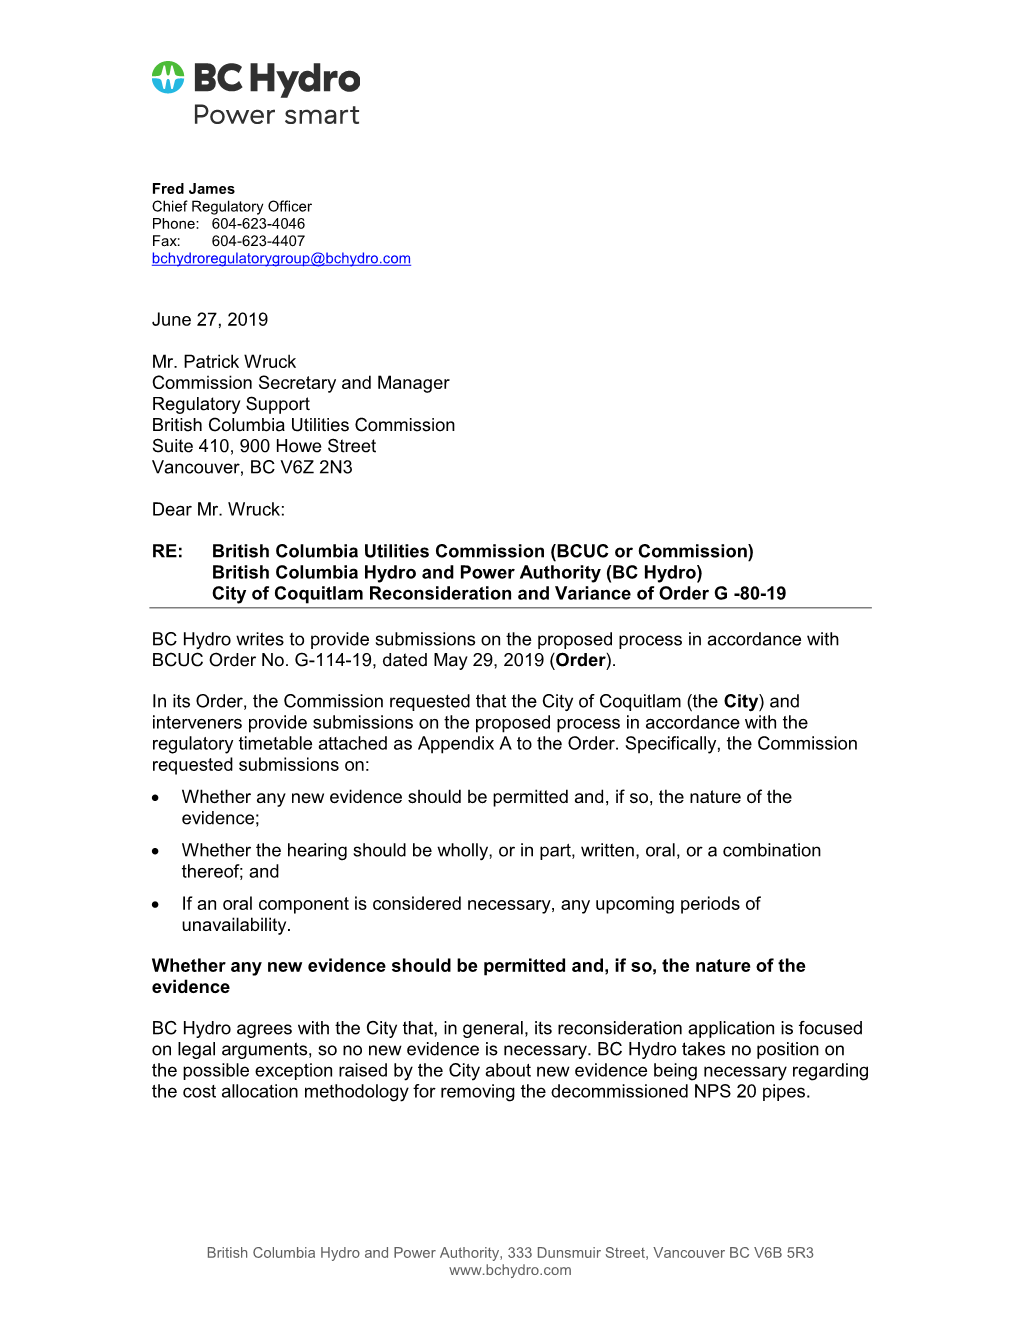 2019 06 27 BC Hydro Submission on Process